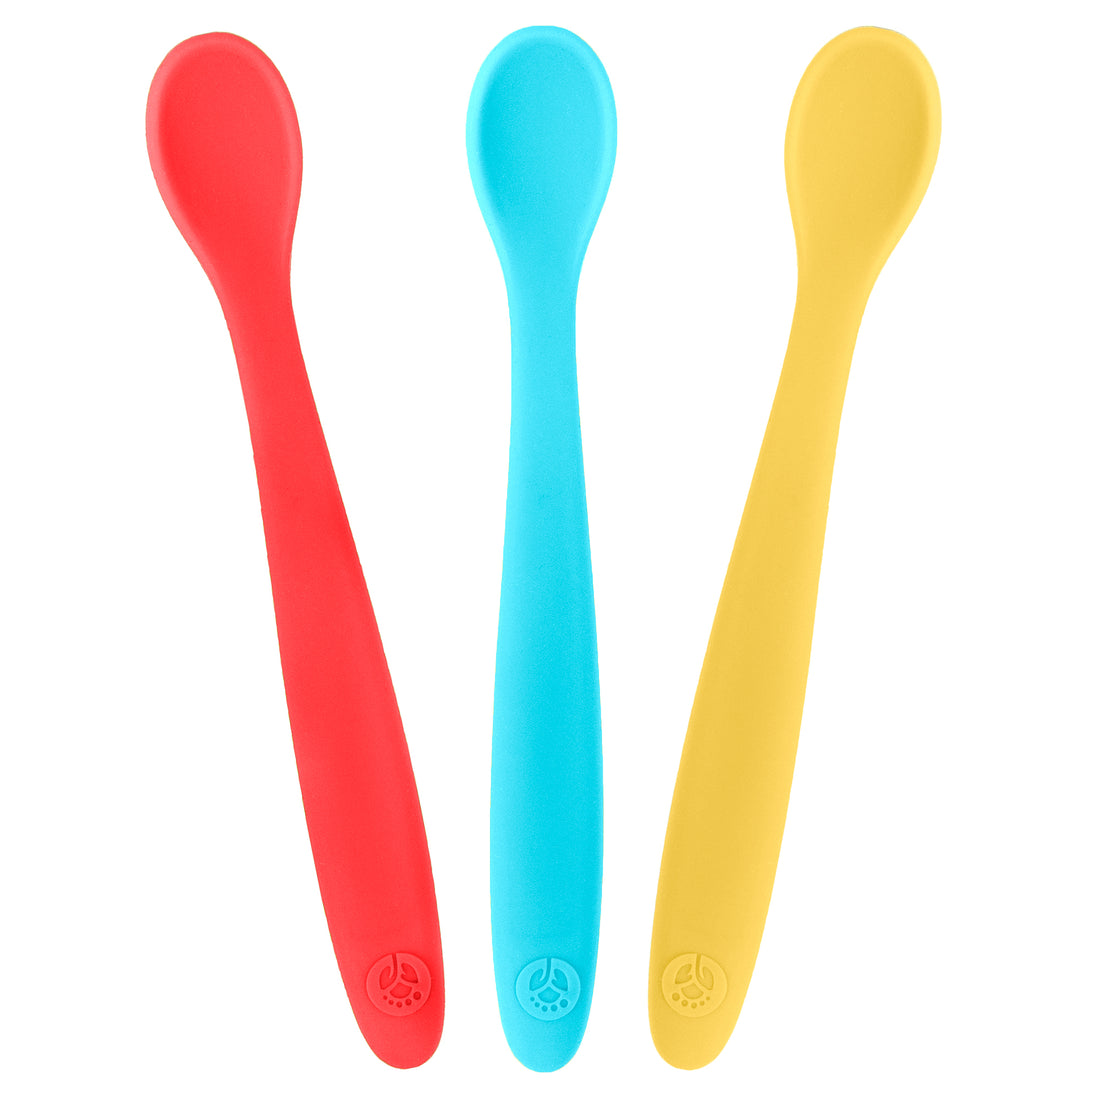 WeeSprout Silicone Spoons (Set of 3), Size: Bright Blue, Red & Yellow